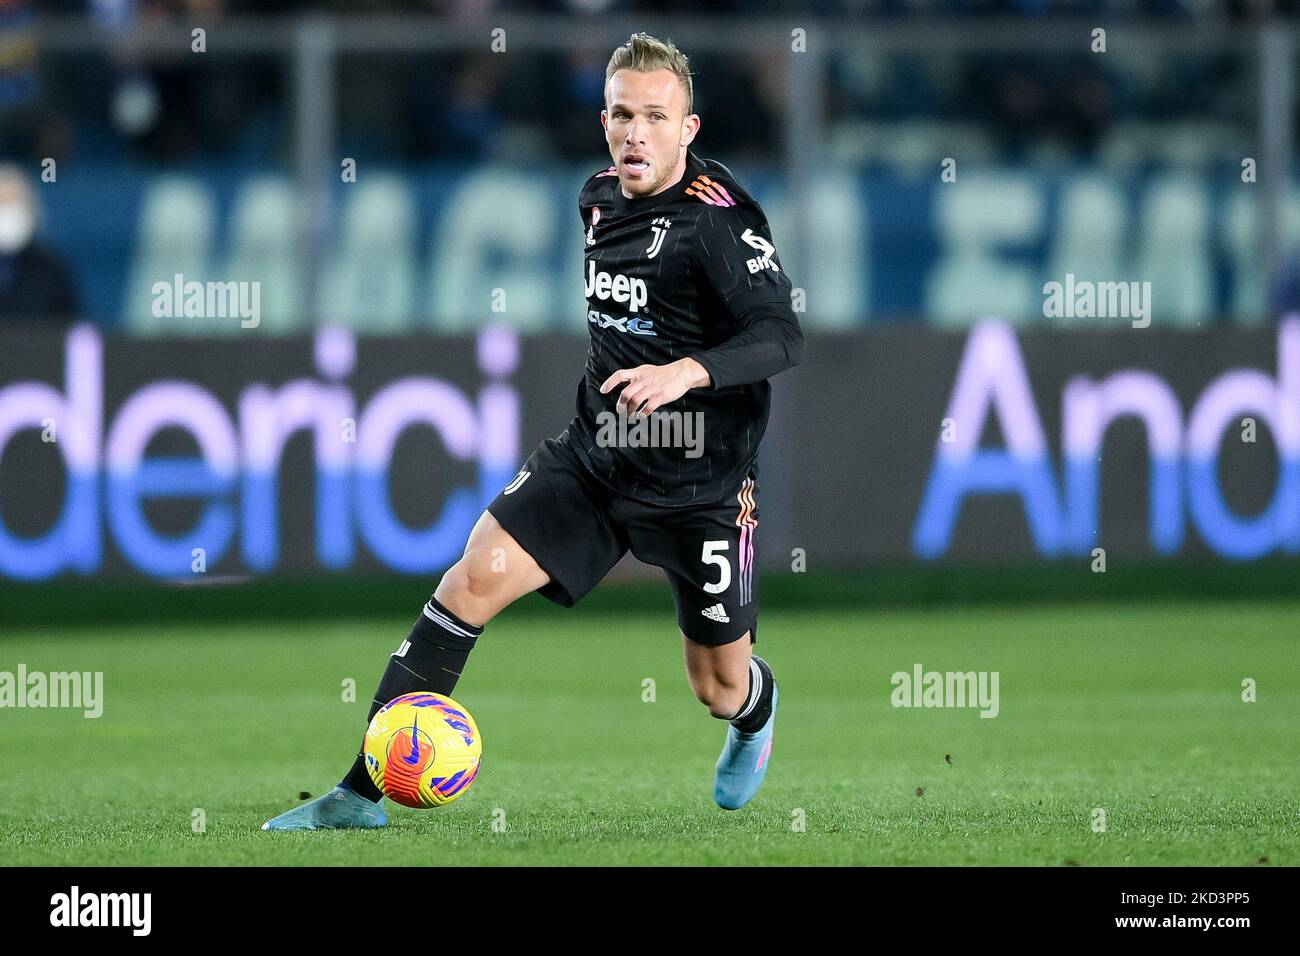 Arthur of FC Juventus during the Serie A match between Empoli FC and FC Juventus at Stadio Comunale Carlo Castellani, Empoli, Florence, Italy on 26 February 2022. (Photo by Giuseppe Maffia/NurPhoto) Stock Photo